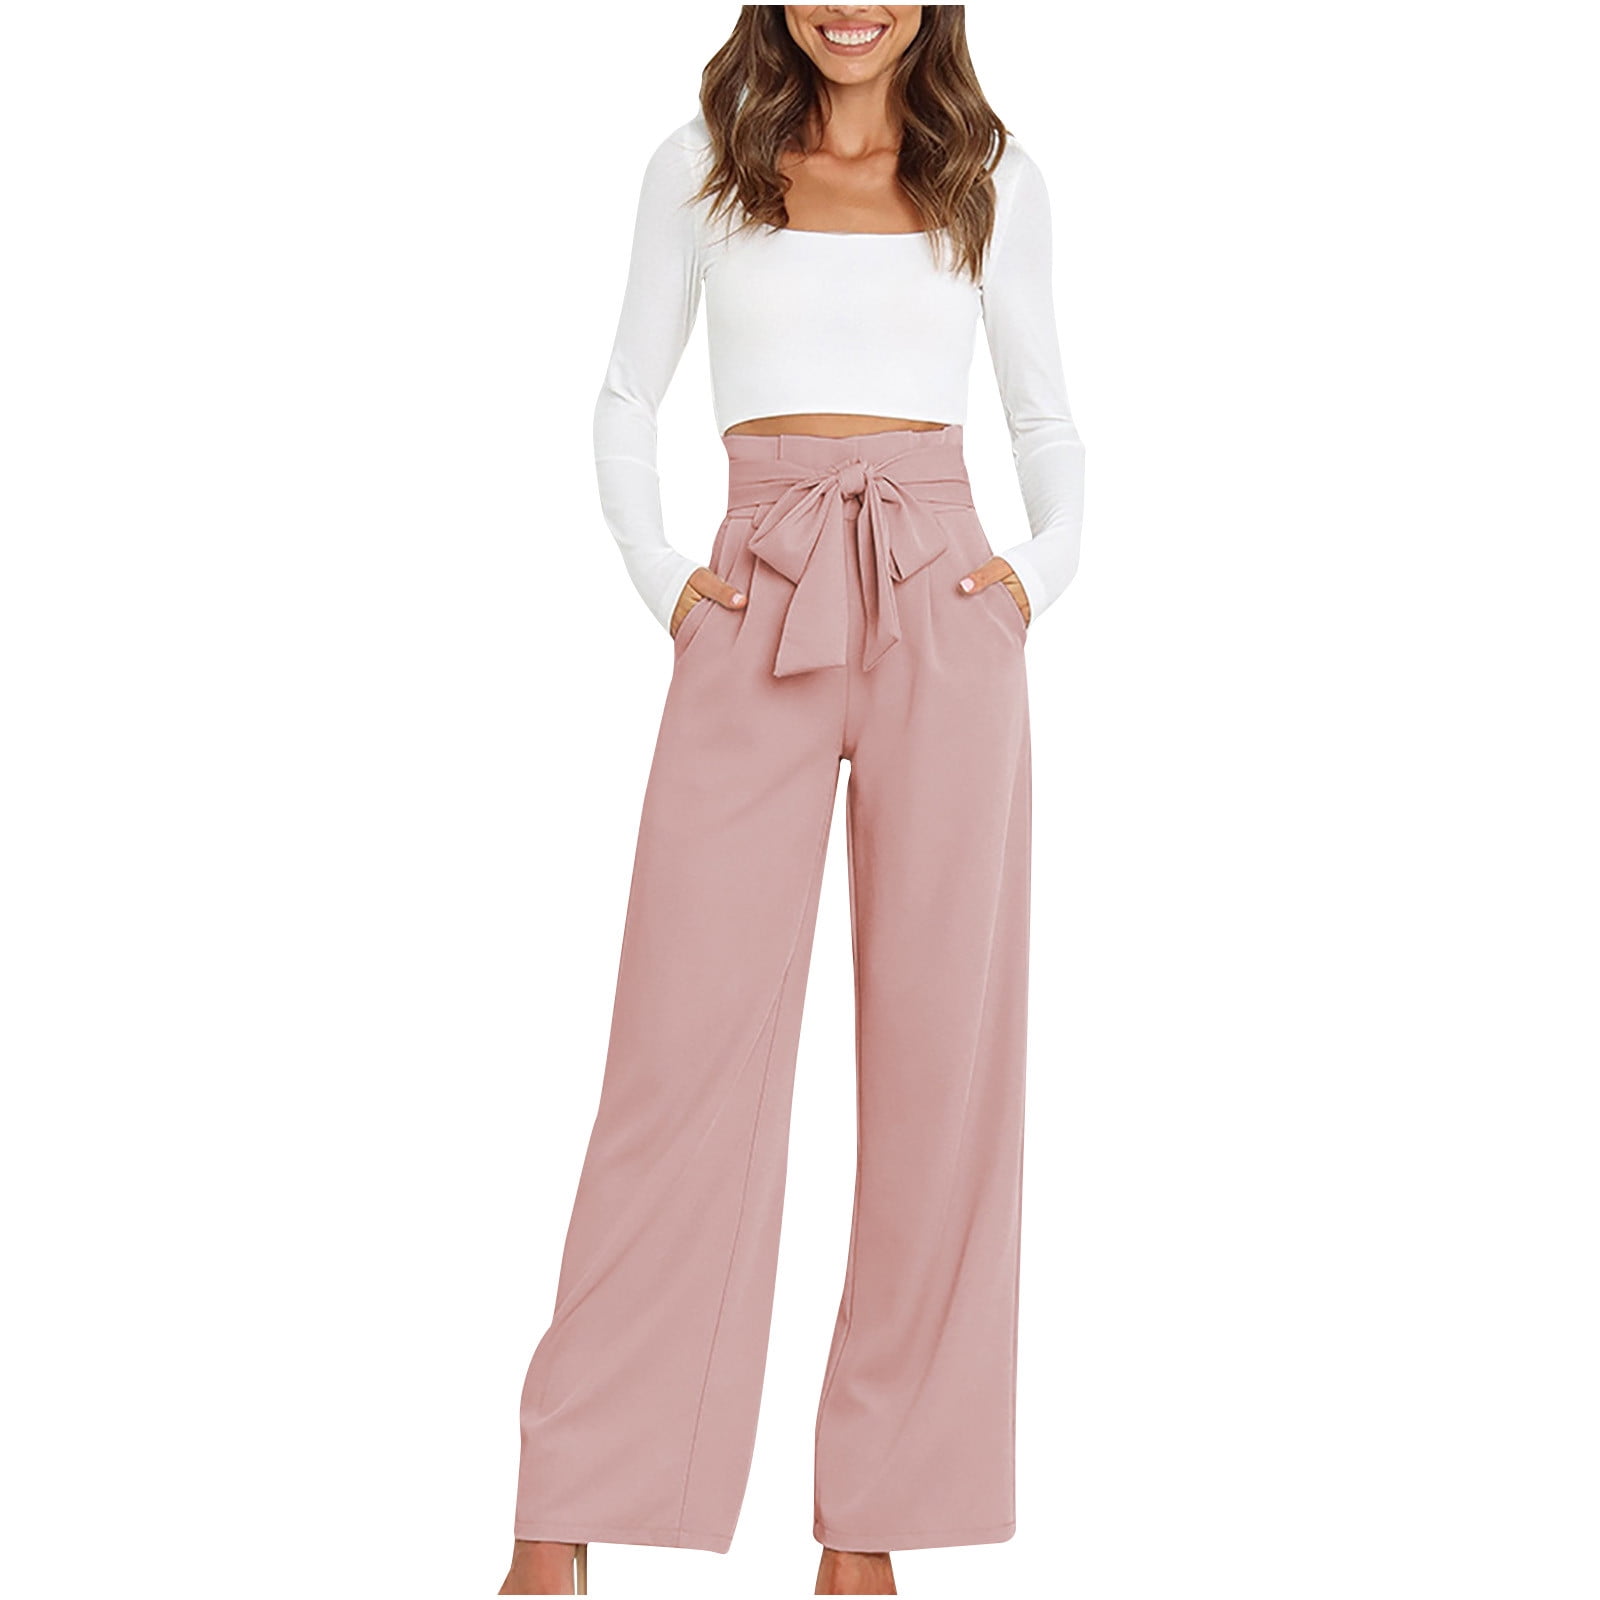 KIHOUT Pants For Women Deals Women's Solid Color High-waist Loose